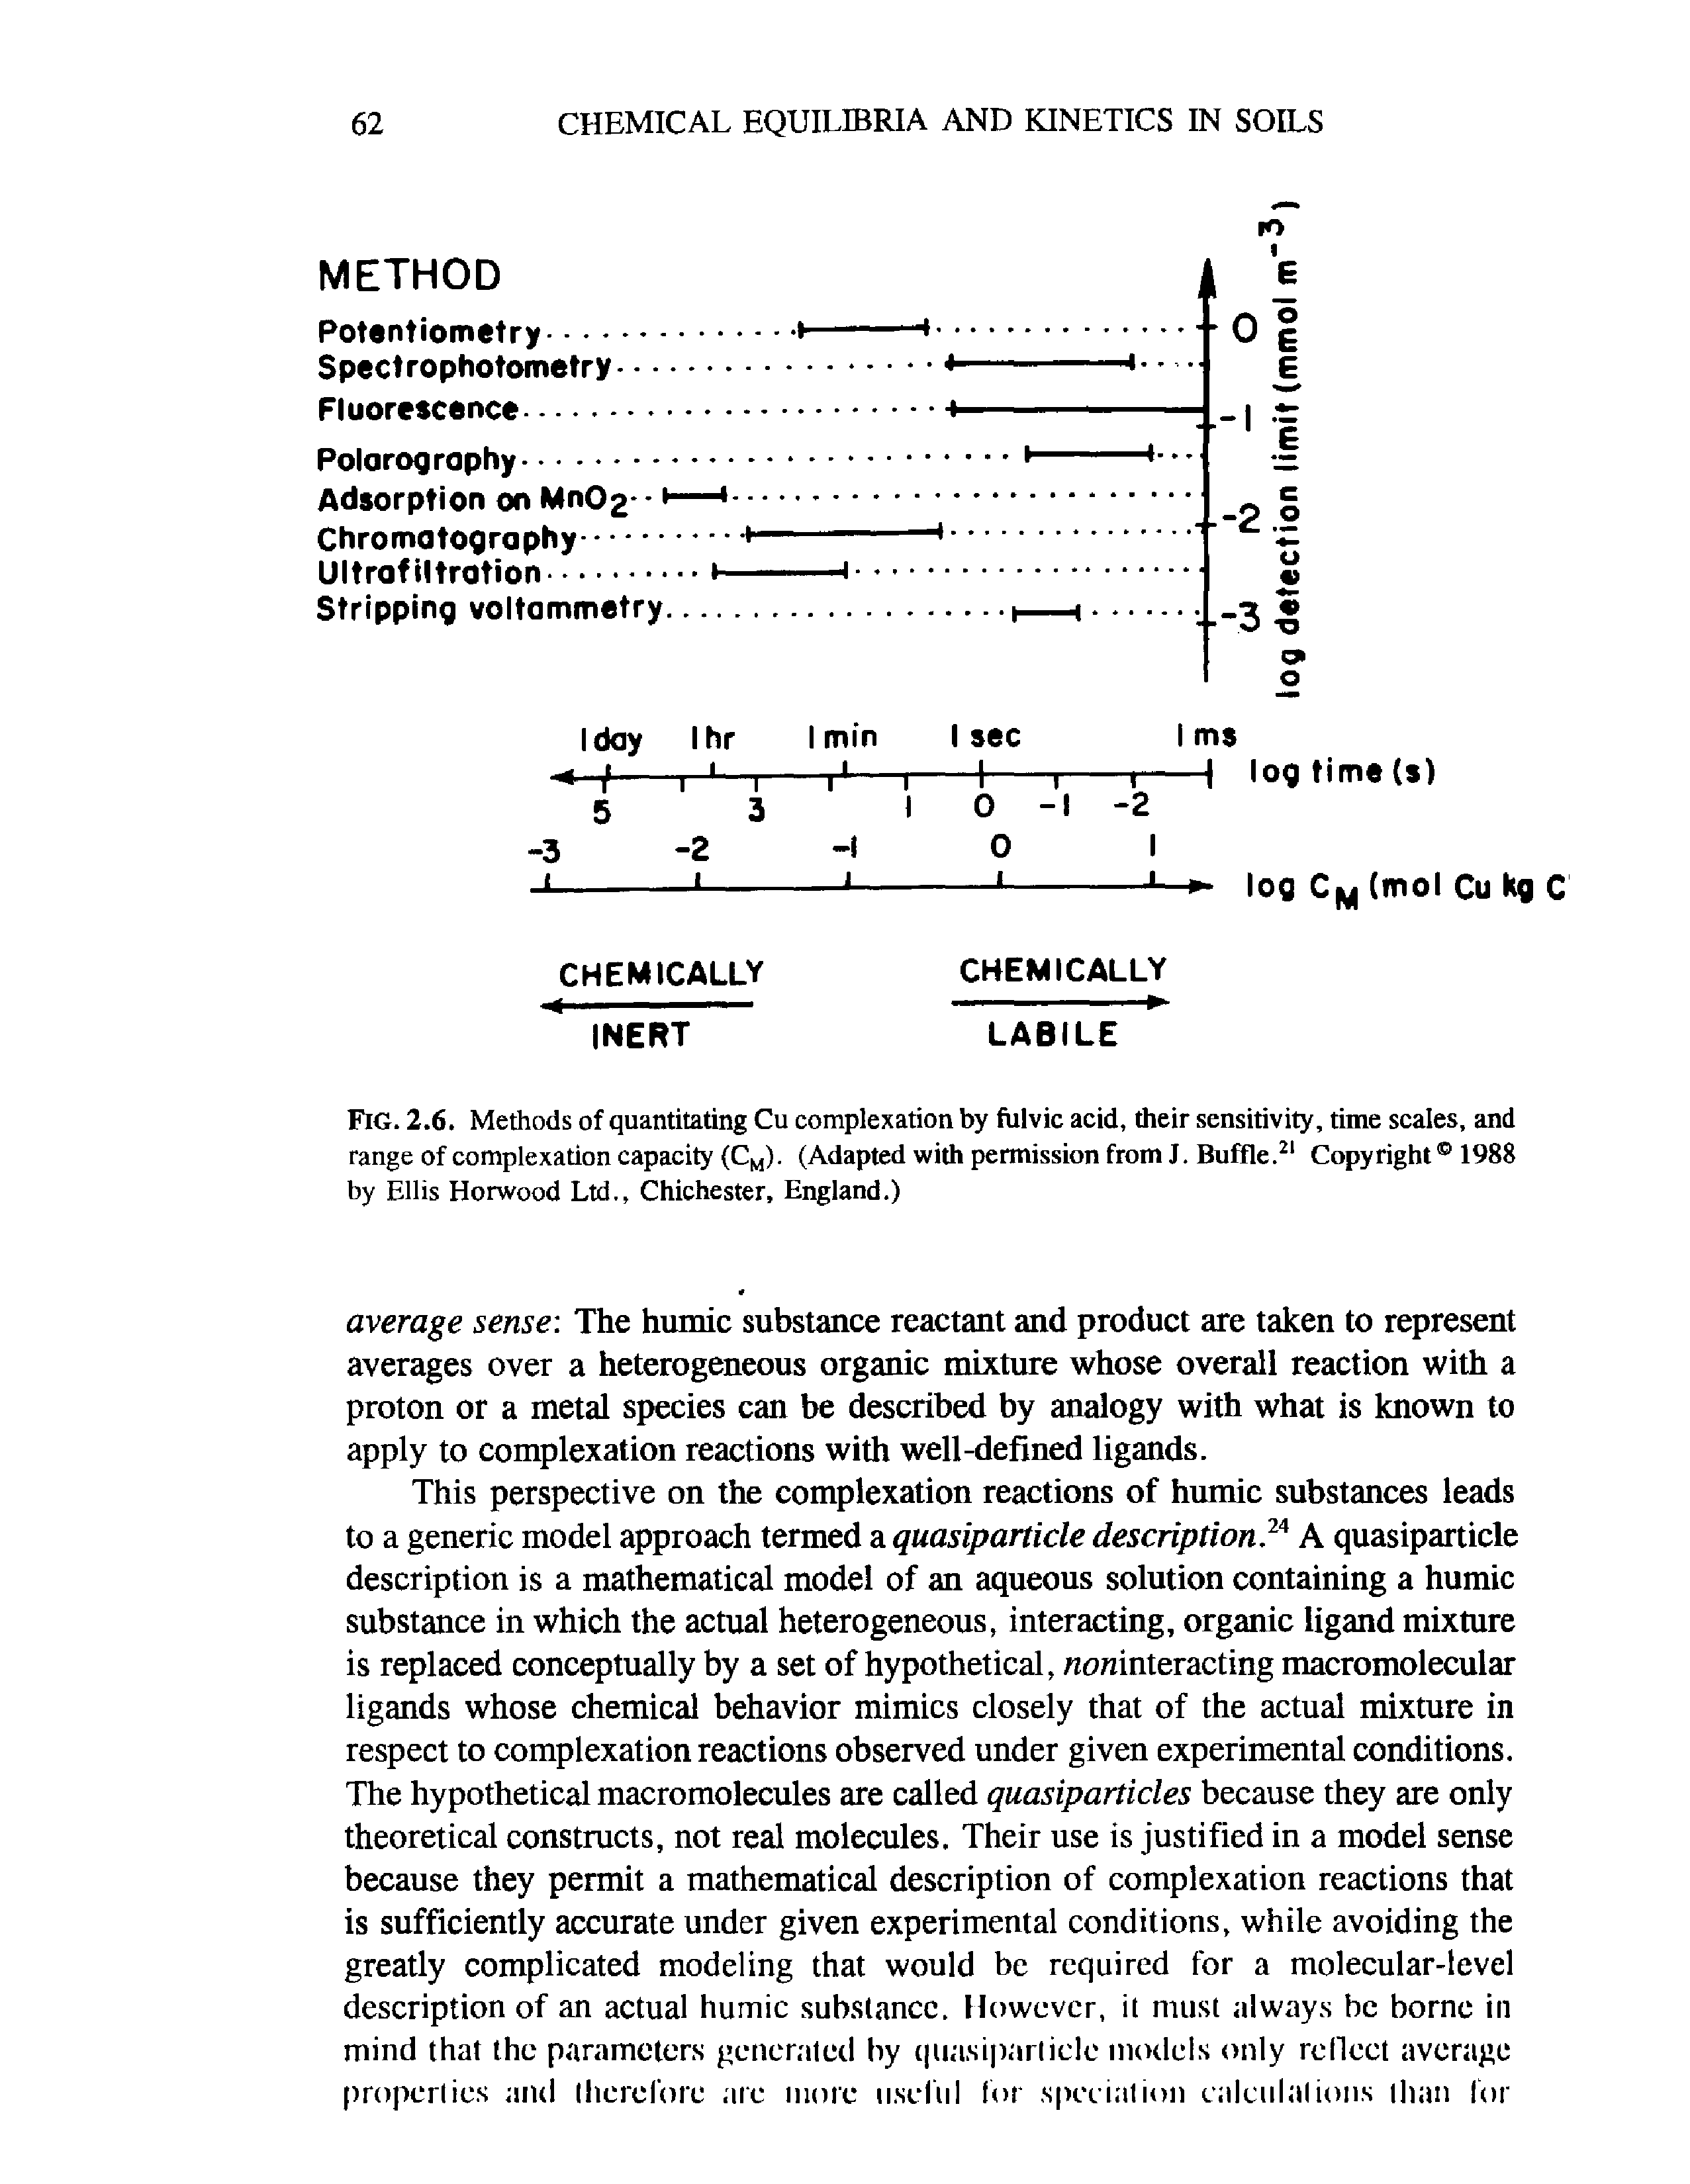 Fig. 2.6. Methods of quantitating Cu complexation by fulvic acid, their sensitivity, time scales, and range of complexation capacity (CM). (Adapted with permission from J. Buffle.21 Copyright 1988 by Ellis Horwood Ltd., Chichester, England.)...